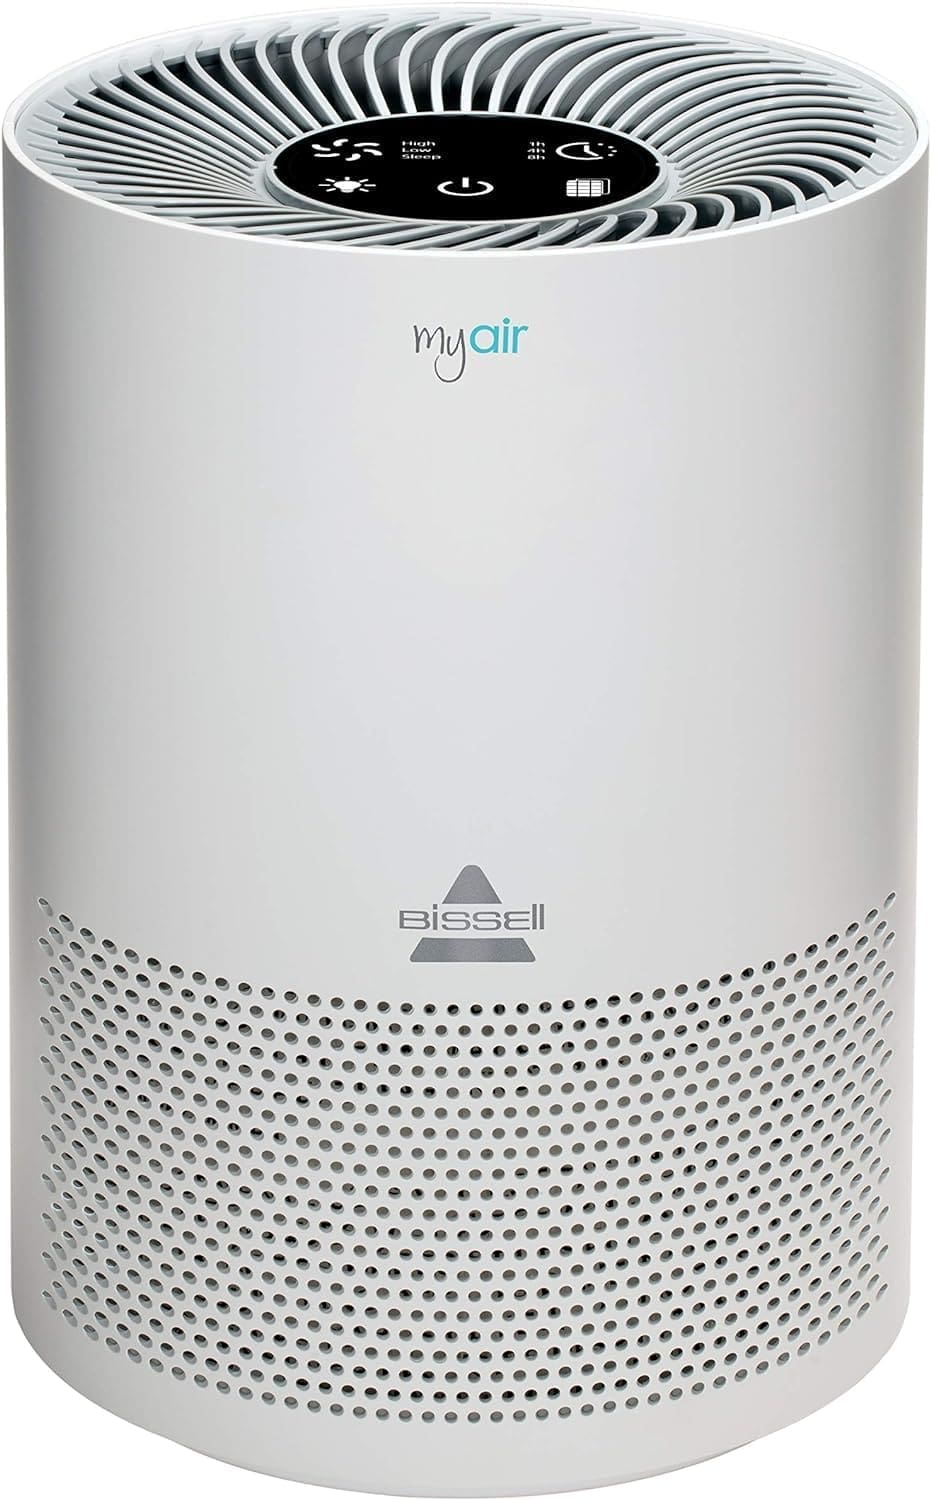 BISSELL MYair Air Purifier Review